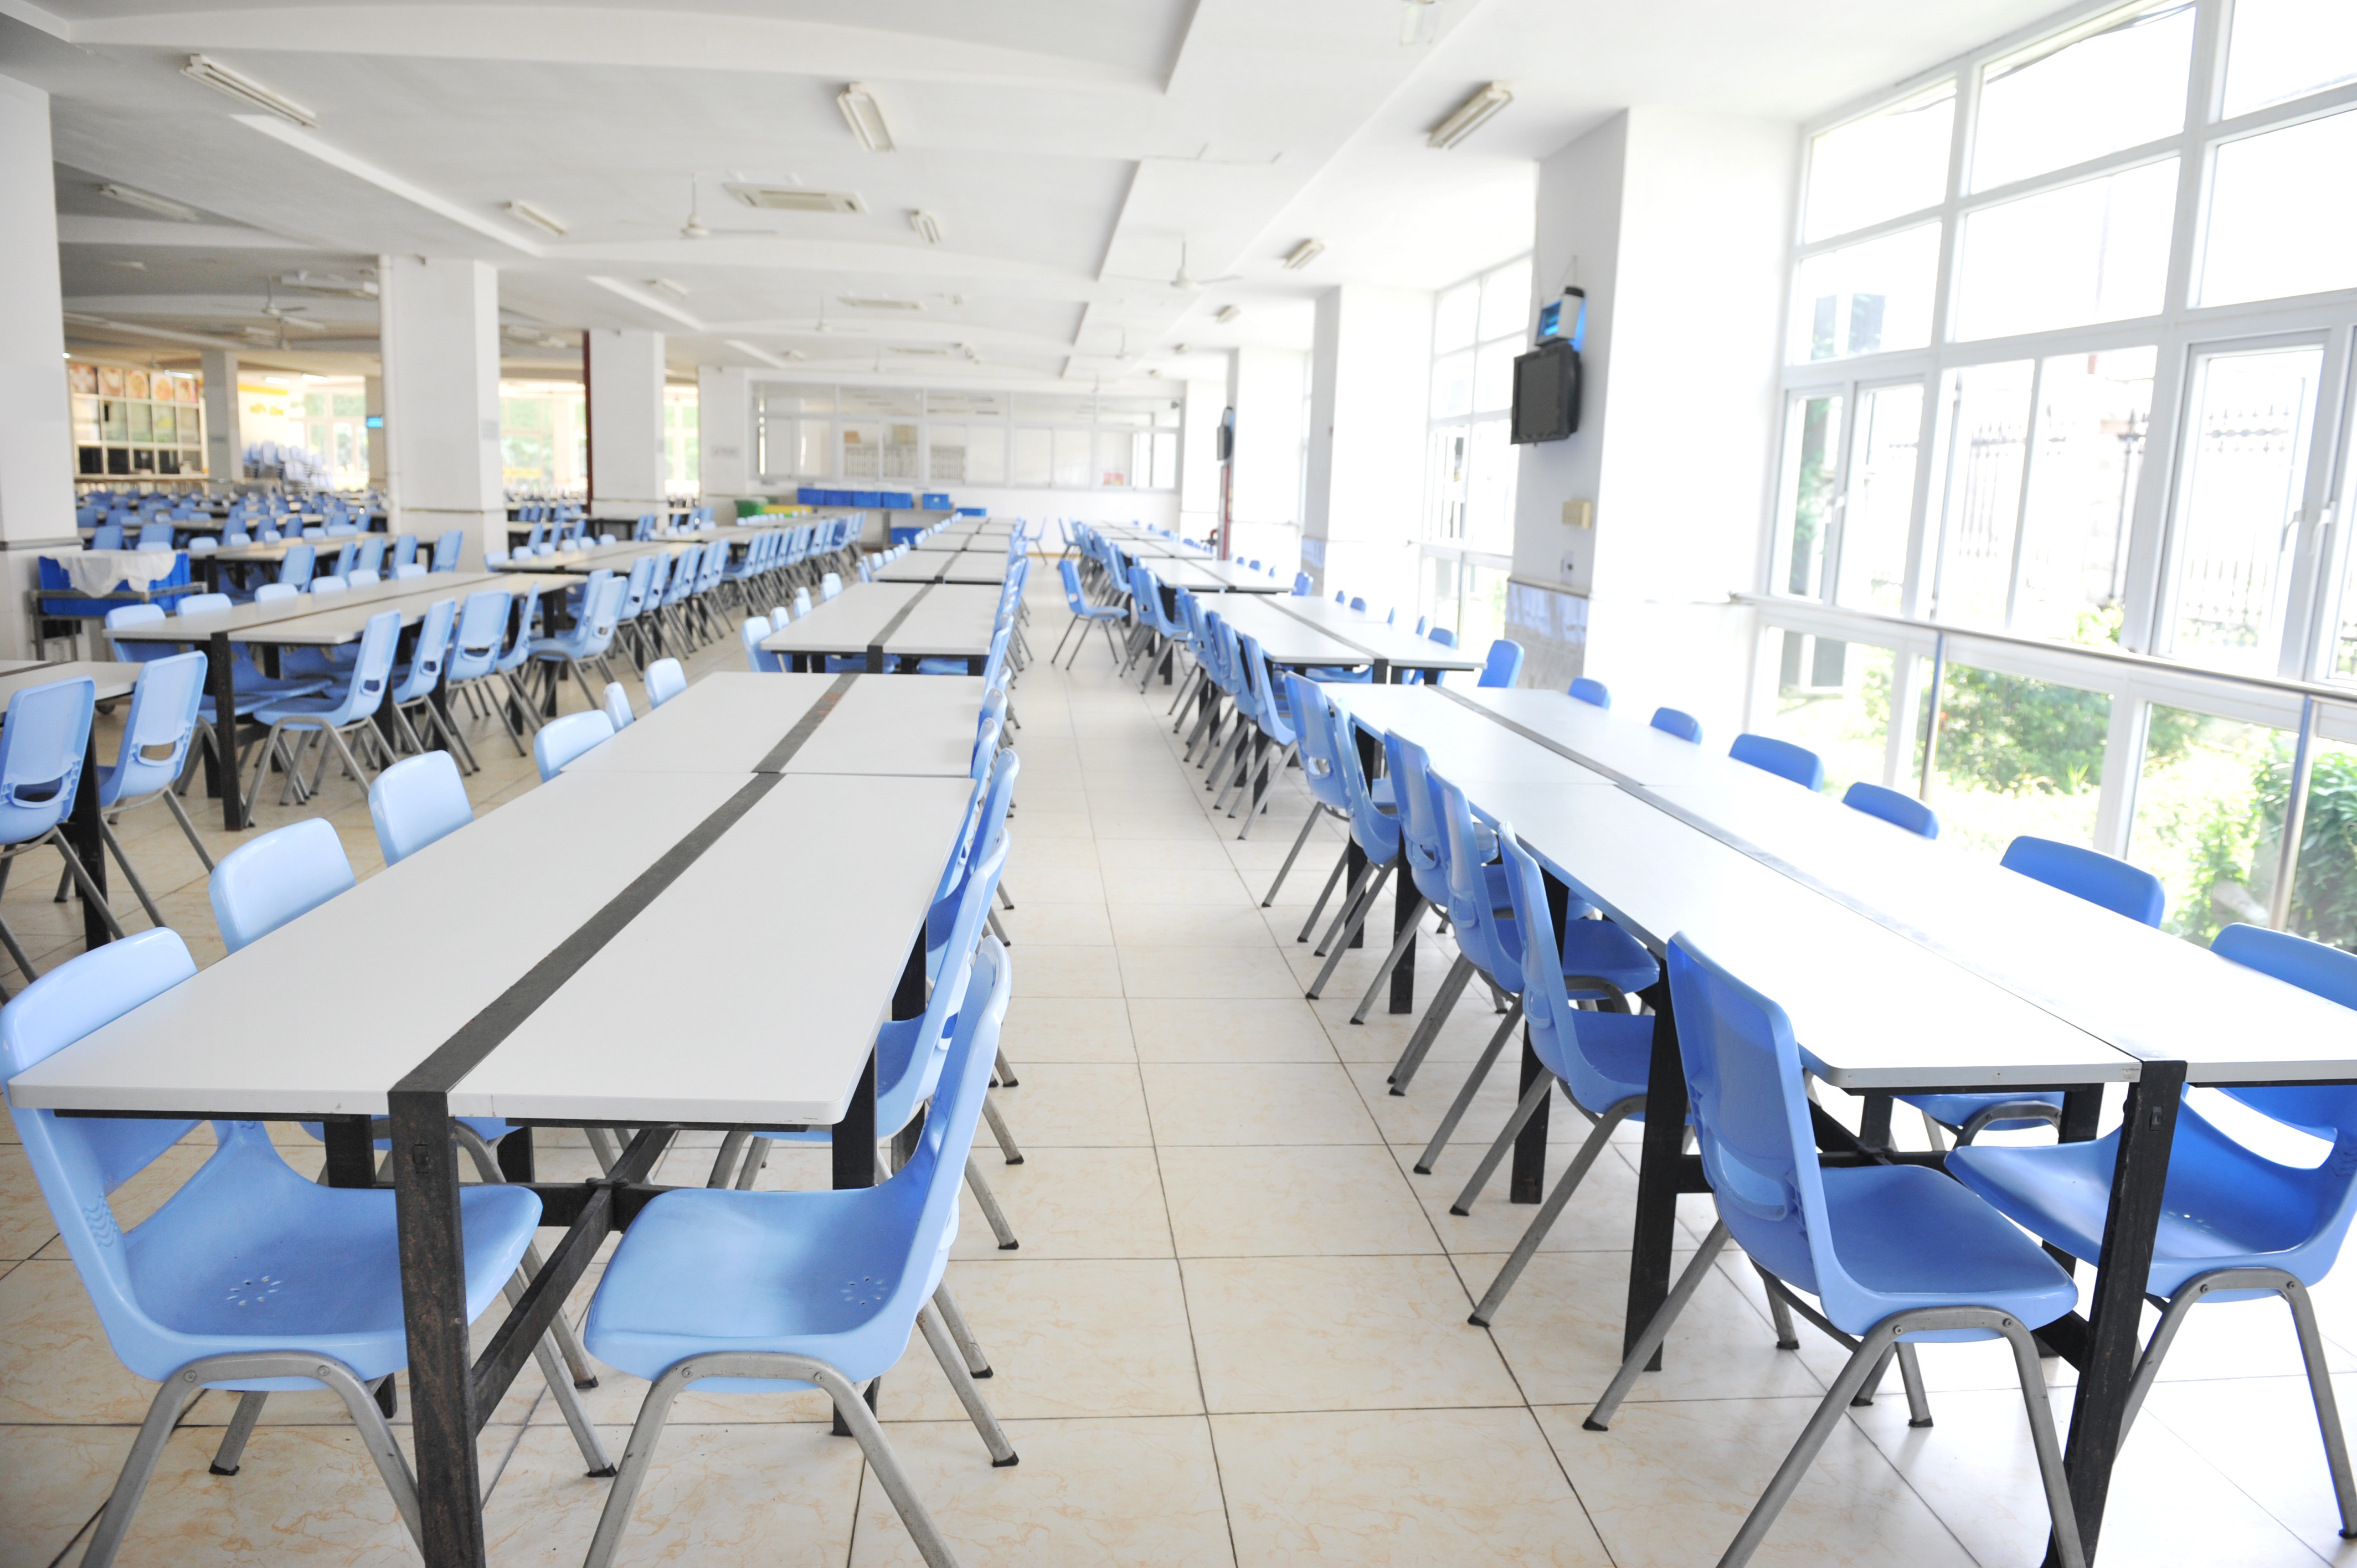 Line of school tables and chairs for kids to sit at, in front of a wall of windows